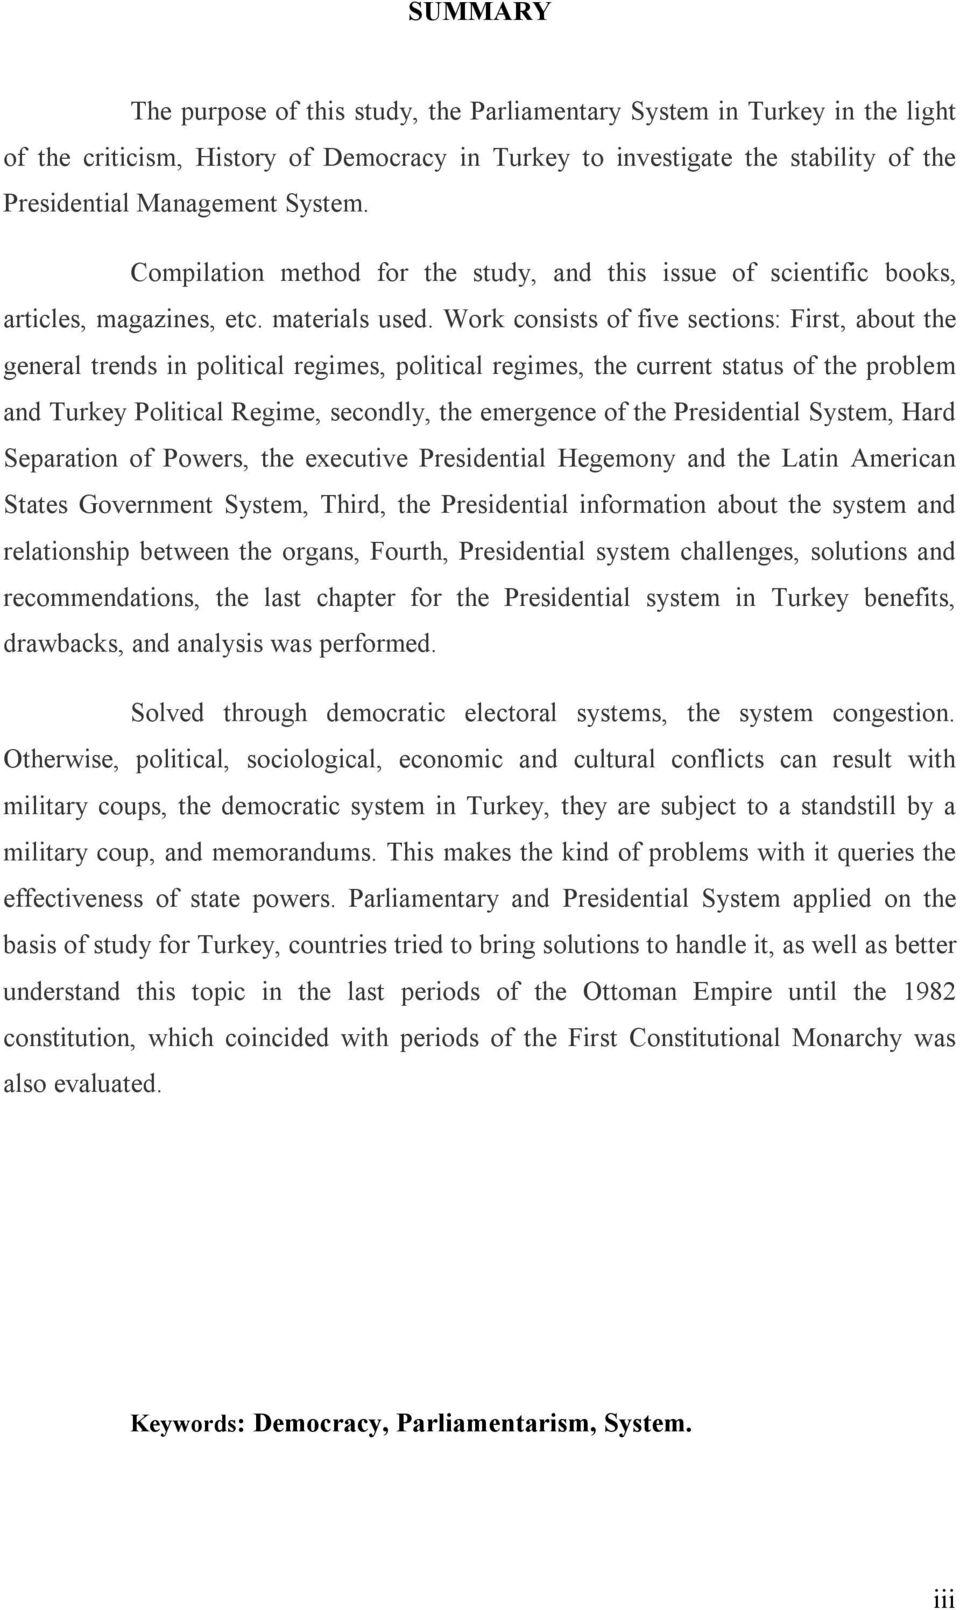 Work consists of five sections: First, about the general trends in political regimes, political regimes, the current status of the problem and Turkey Political Regime, secondly, the emergence of the